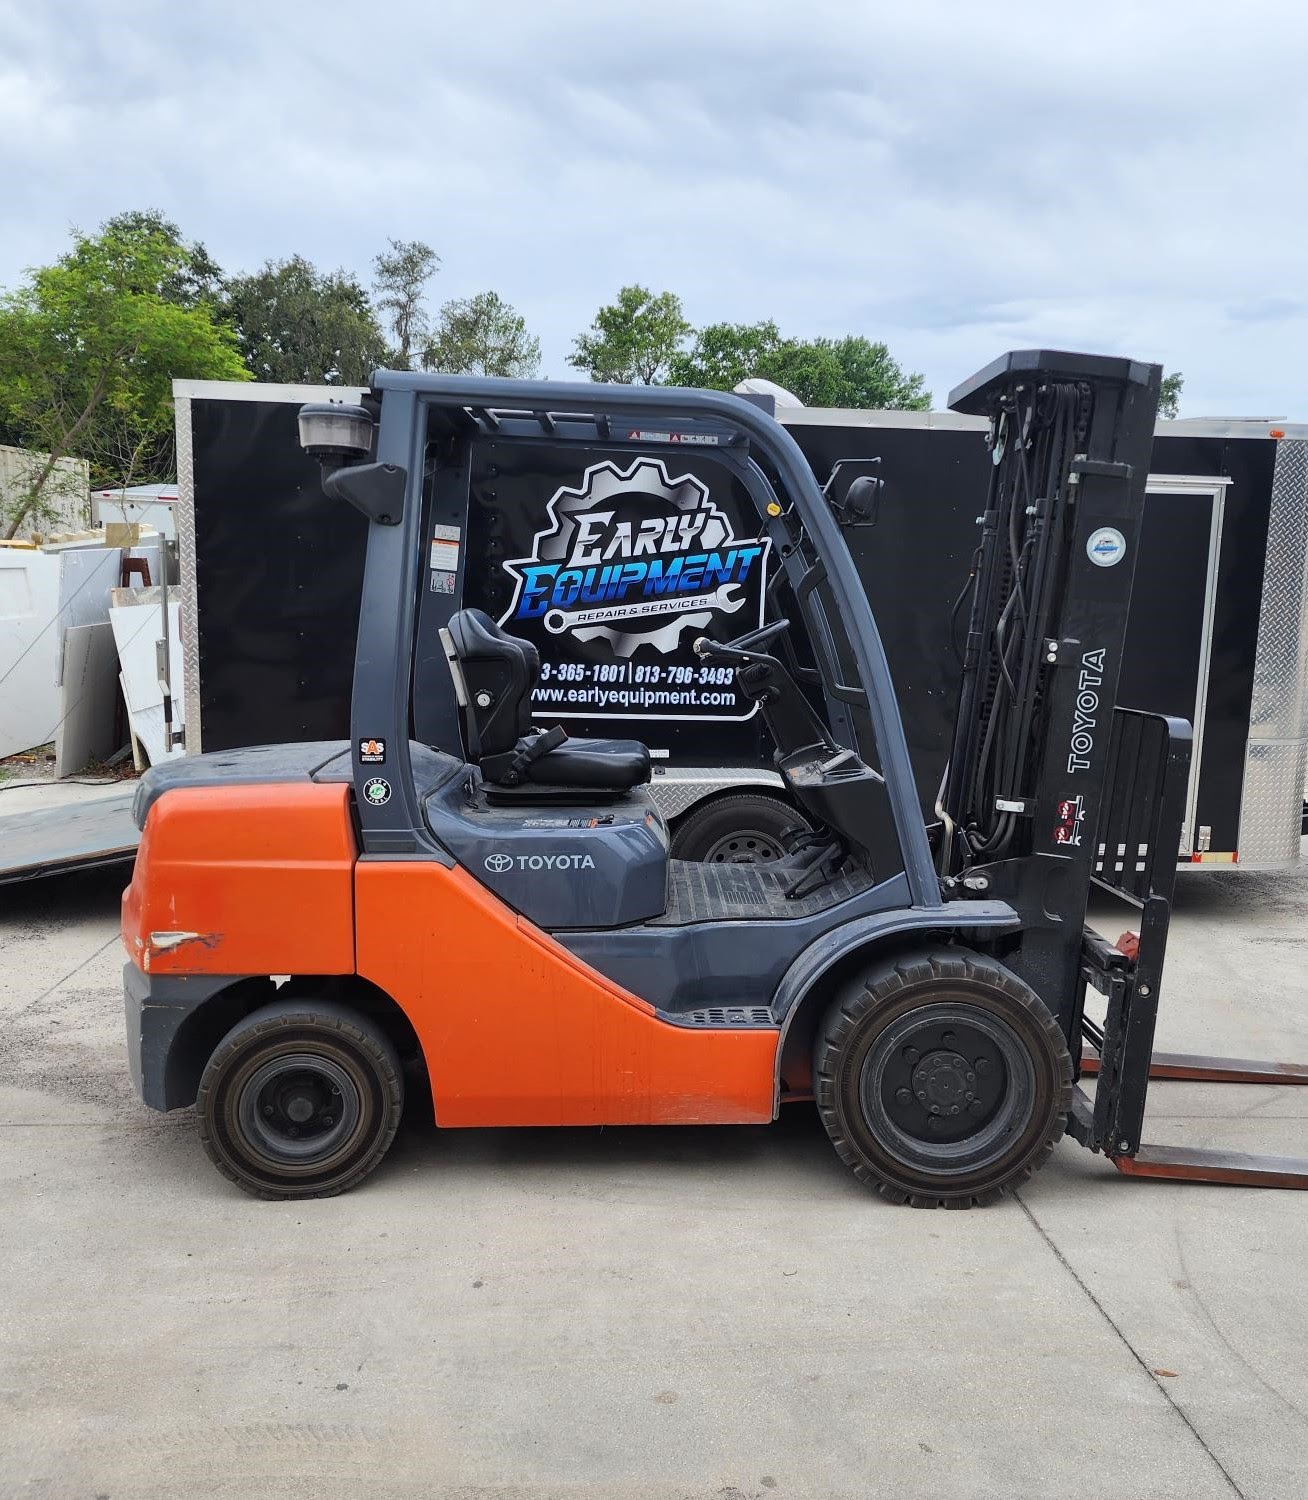 Early Equipment Repair & Services E State Rd 60, Dover Florida 33527